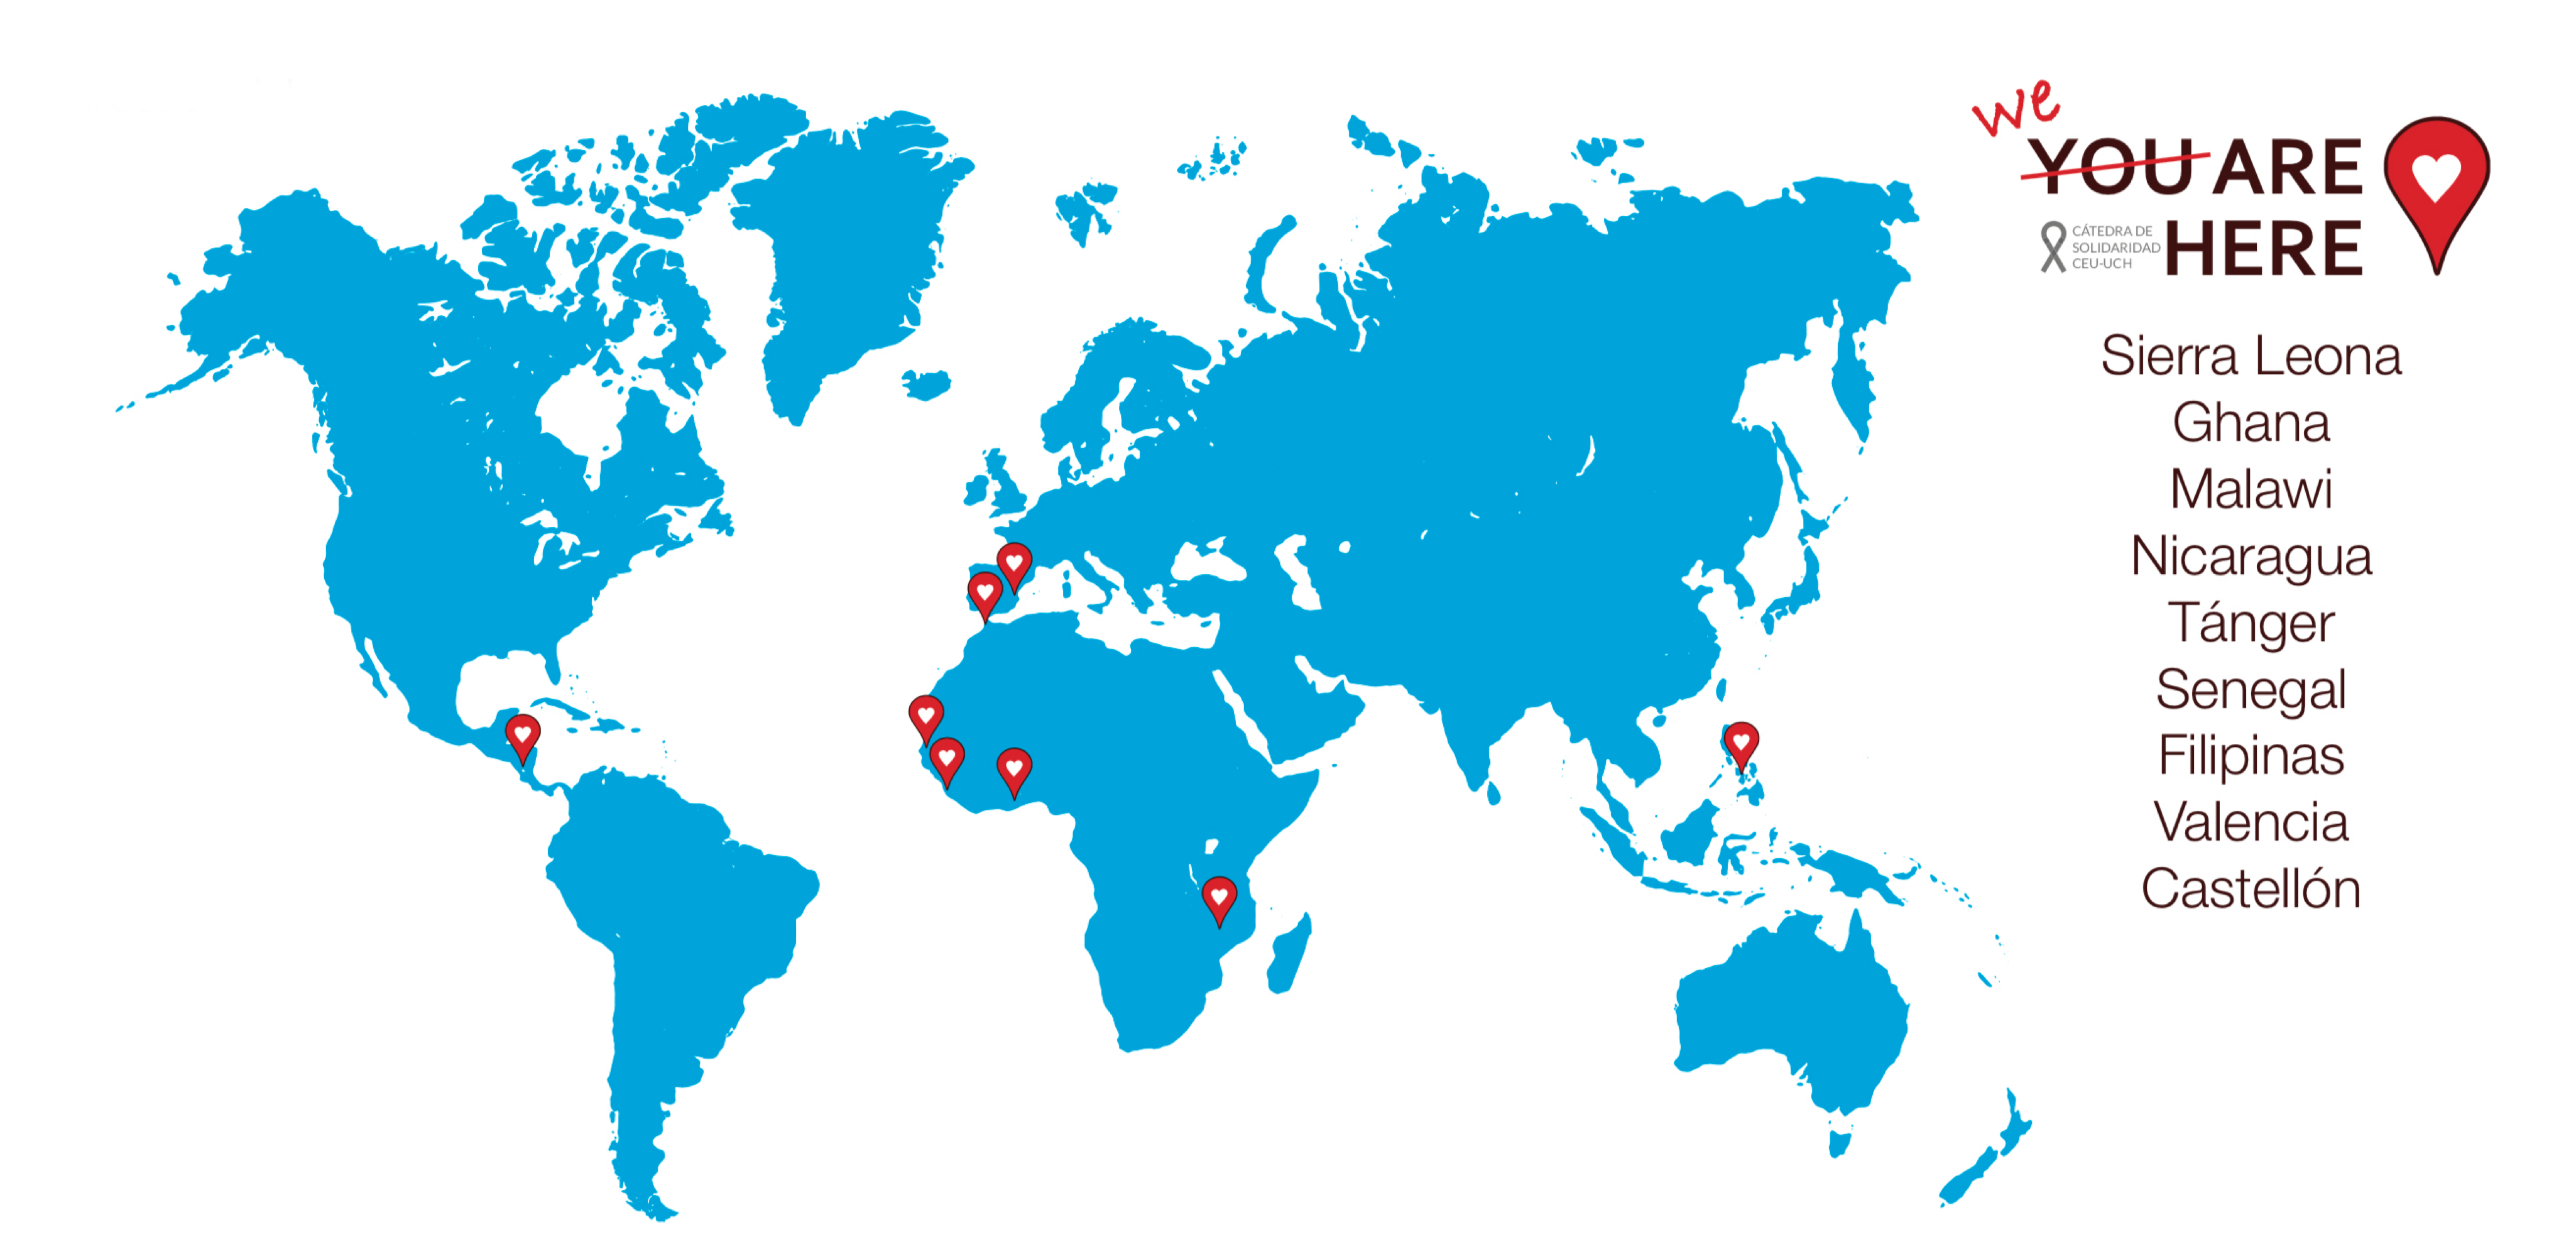 Map of the world showing the locations of the Chair of Solidarity missions.